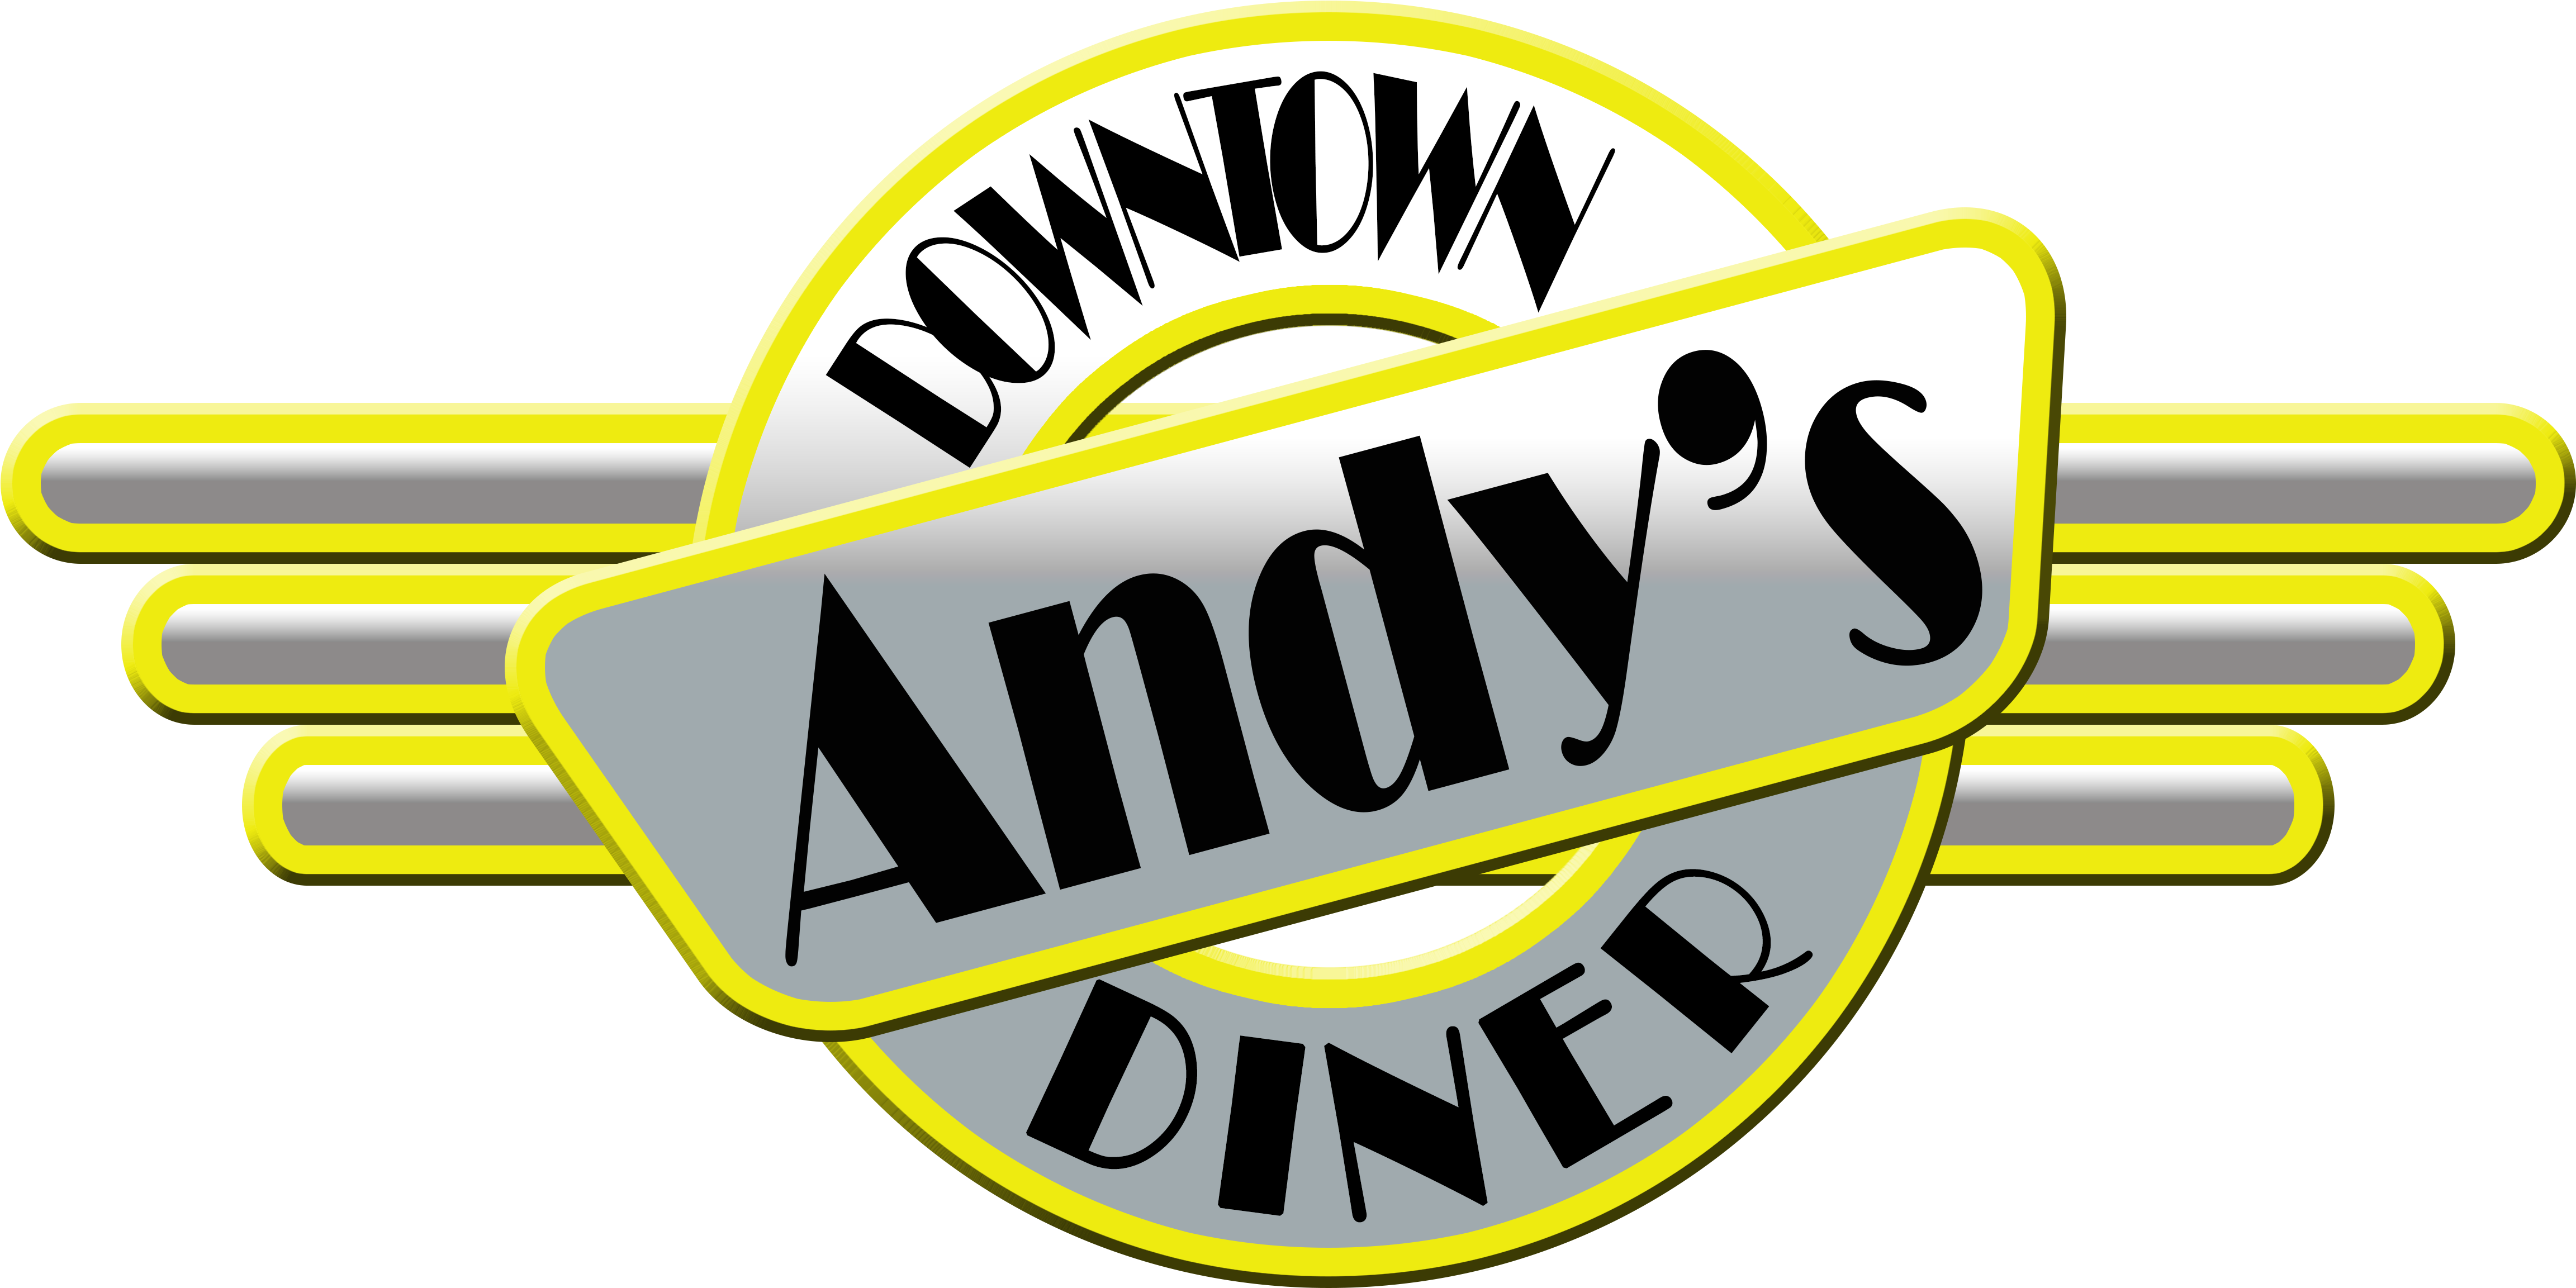 Andy's Diner 3rd Anniversary Party And St, Jude Fundraiser - Andy Diner (4680x2448)